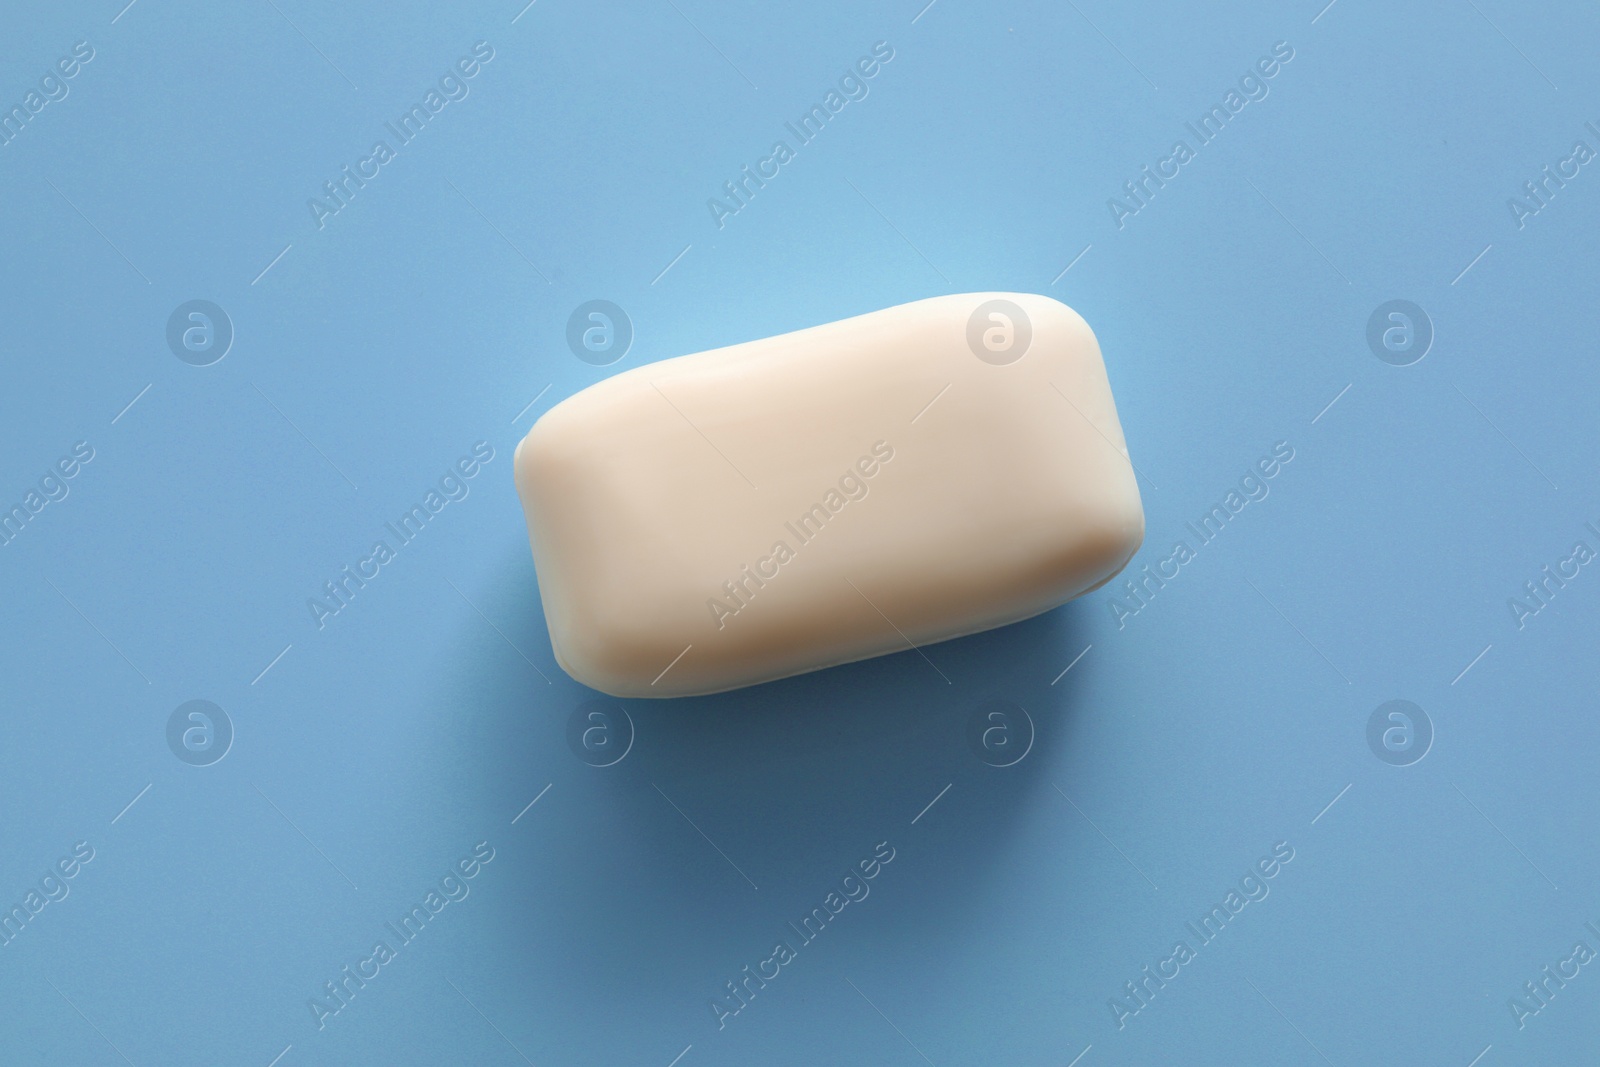 Photo of Soap bar on light blue background, top view